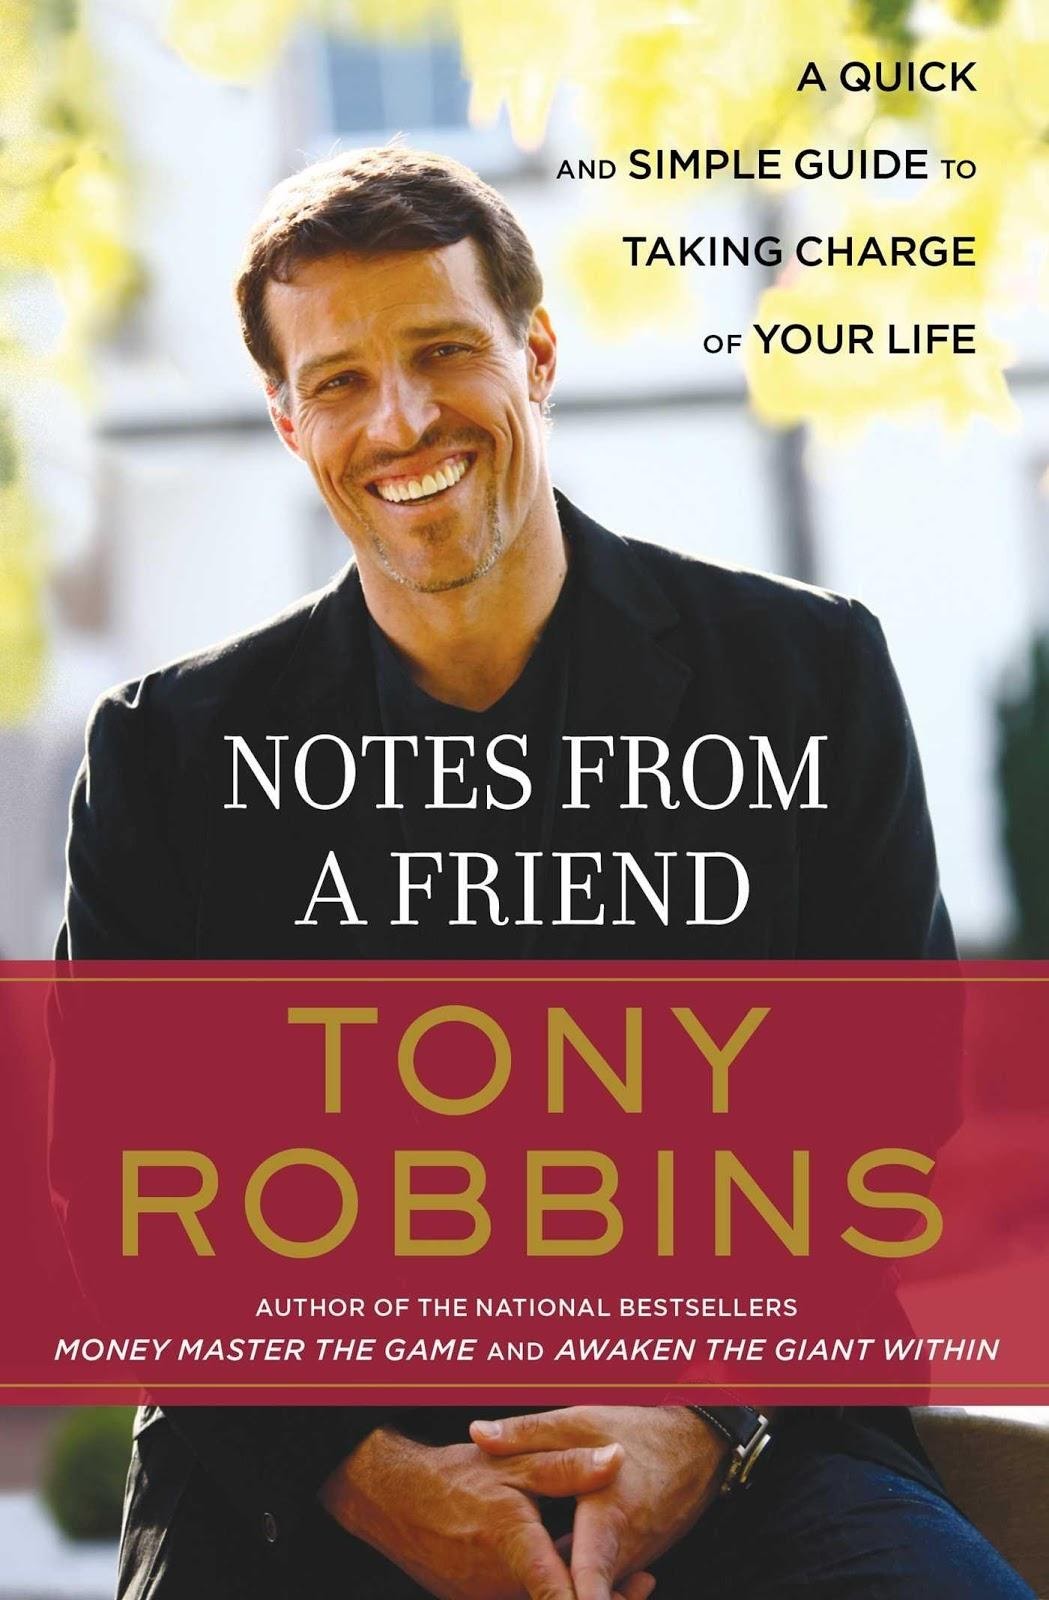 Book 'Notes From a Friend'